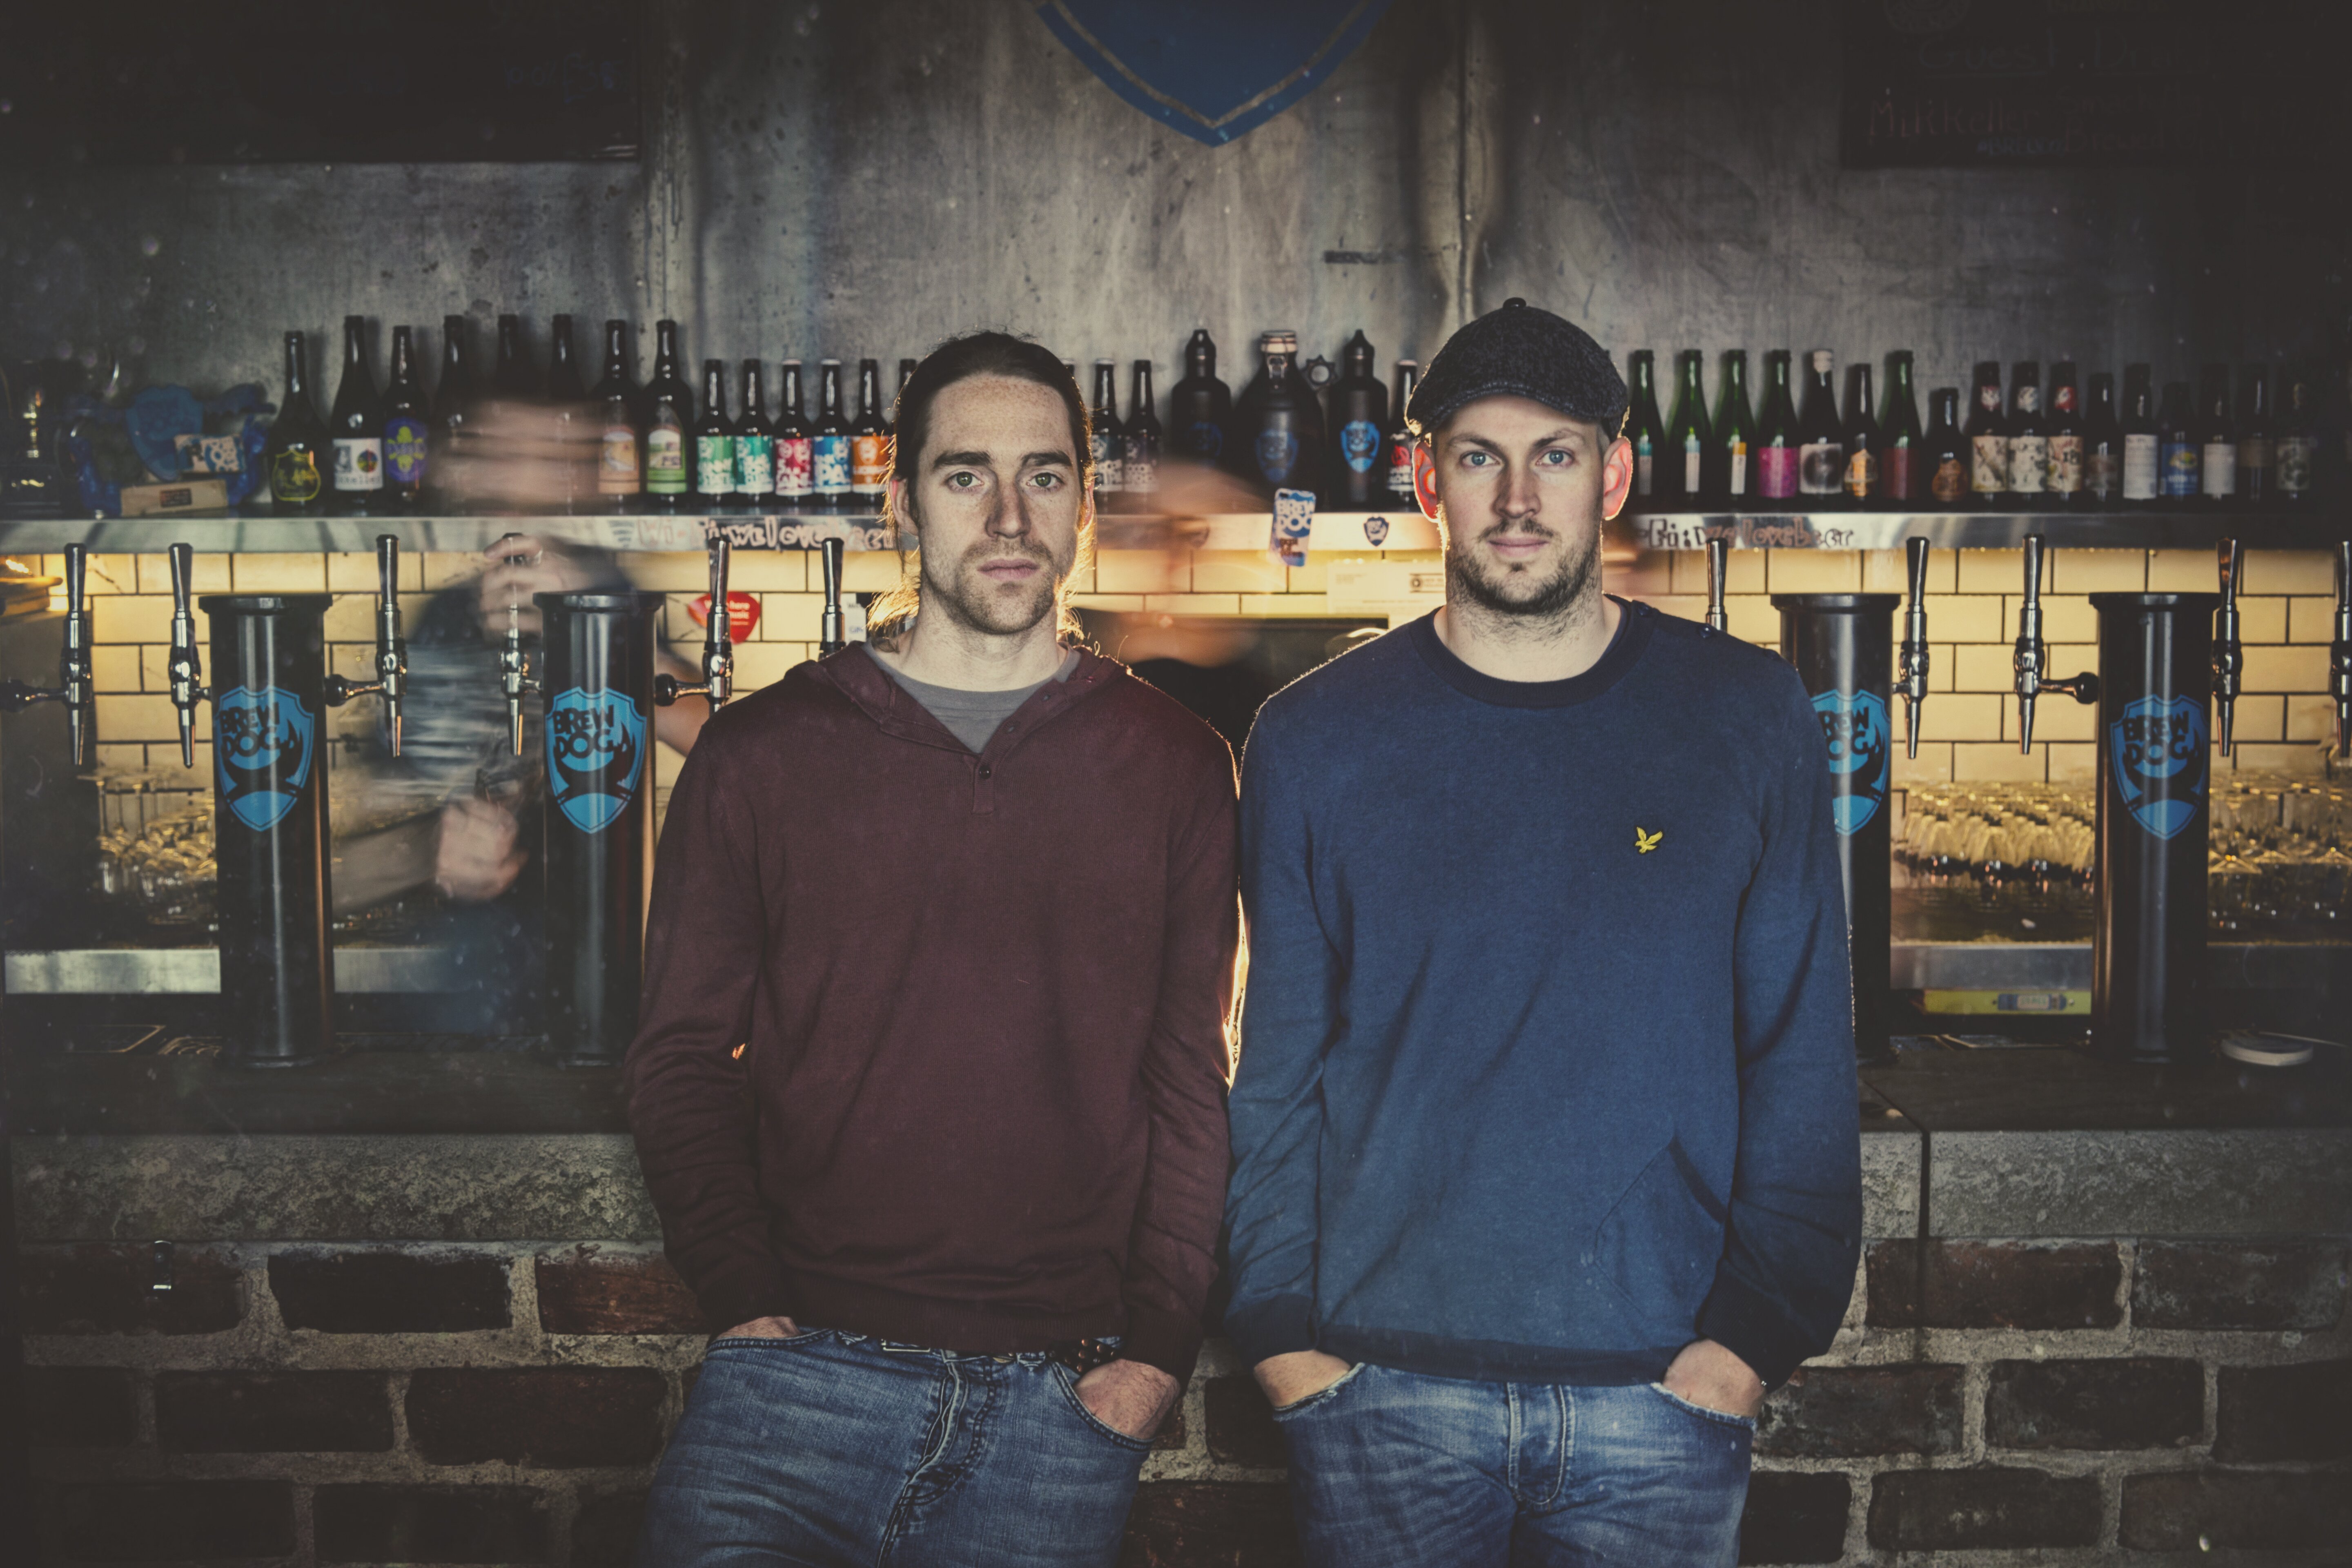 BrewDog introduces workplace code following review into 'toxic' culture claims